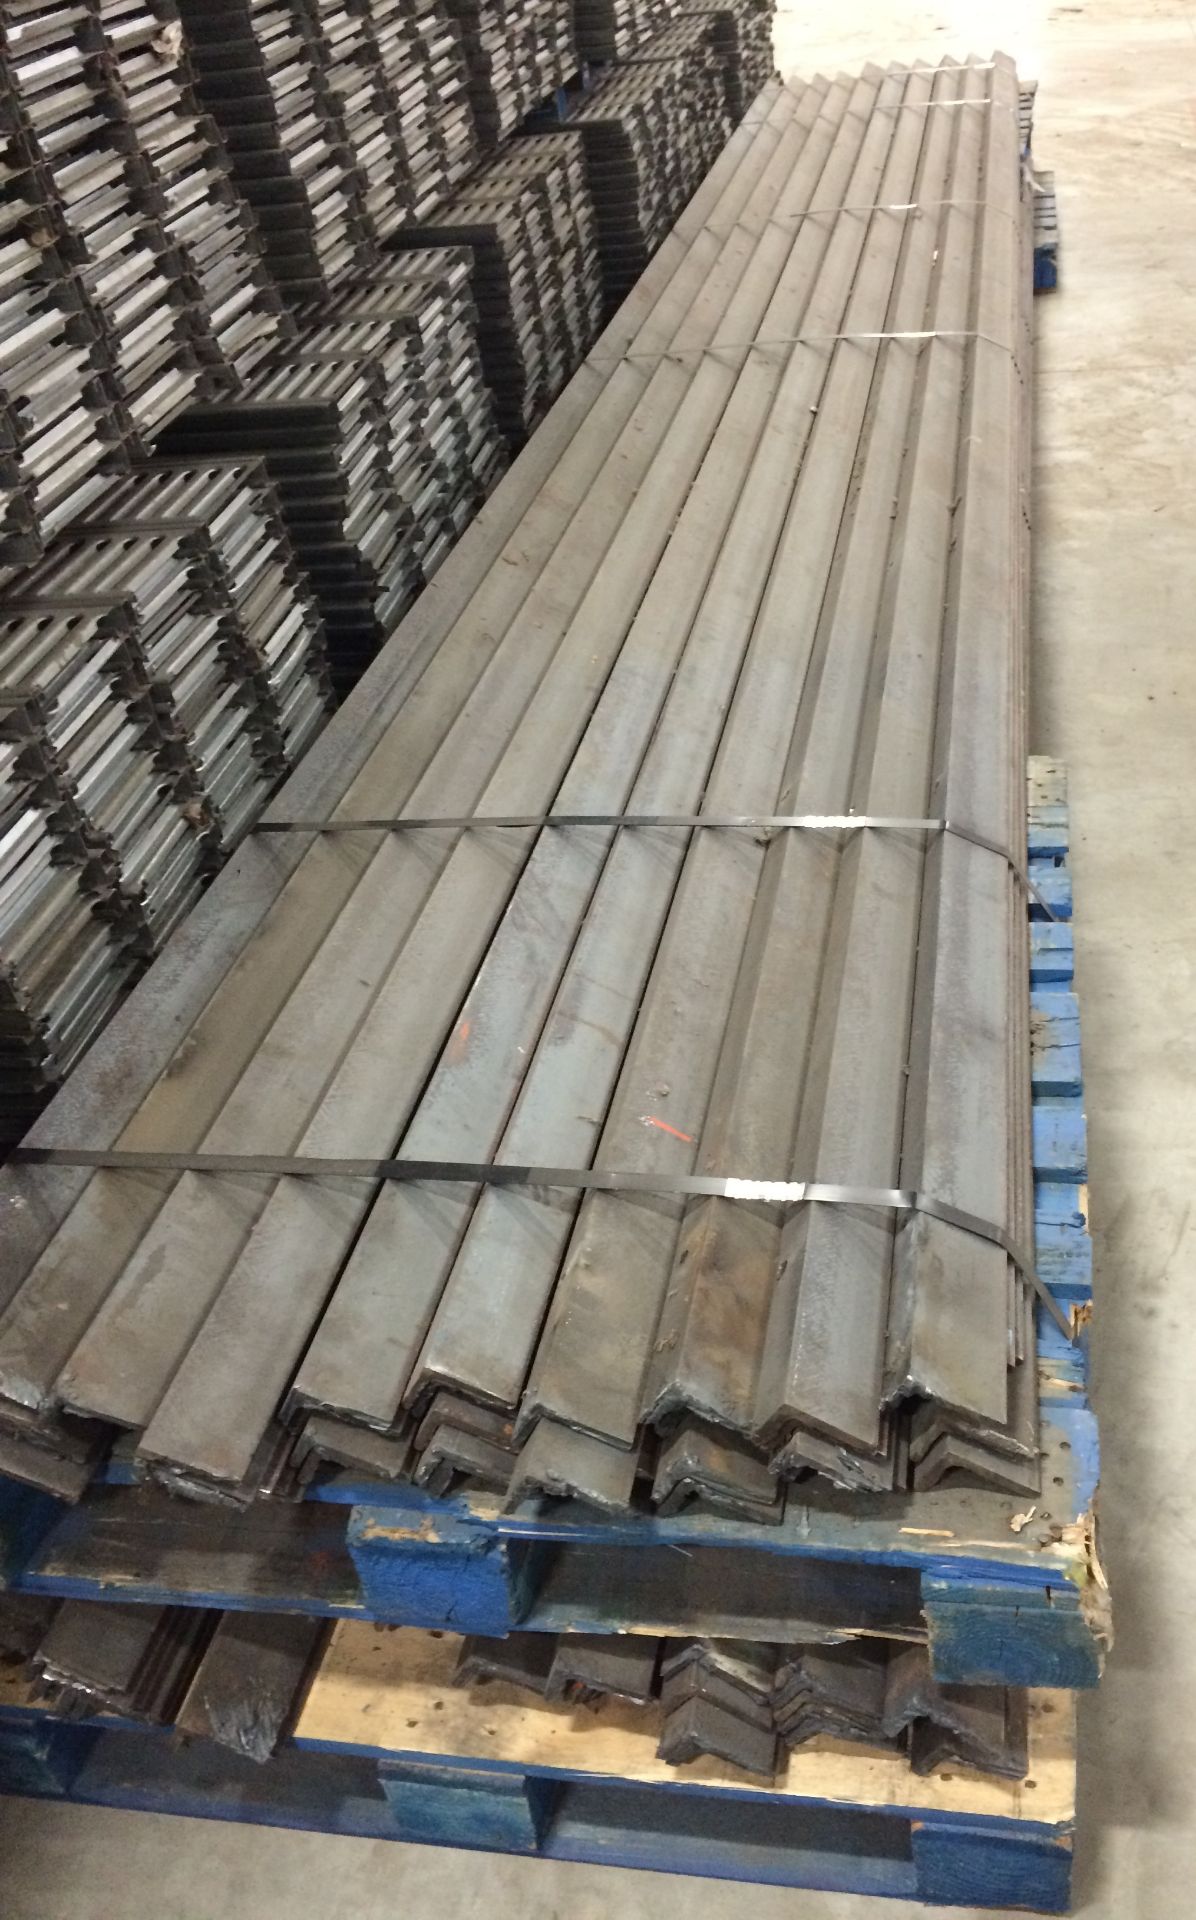 STRUCTURAL STEEL ANGLE IRON GUIDE RAIL SIZE: 3" X 2"X 3/8" X 20FT LONG, 50PCS, 50 TIMES MONEY - Image 3 of 5